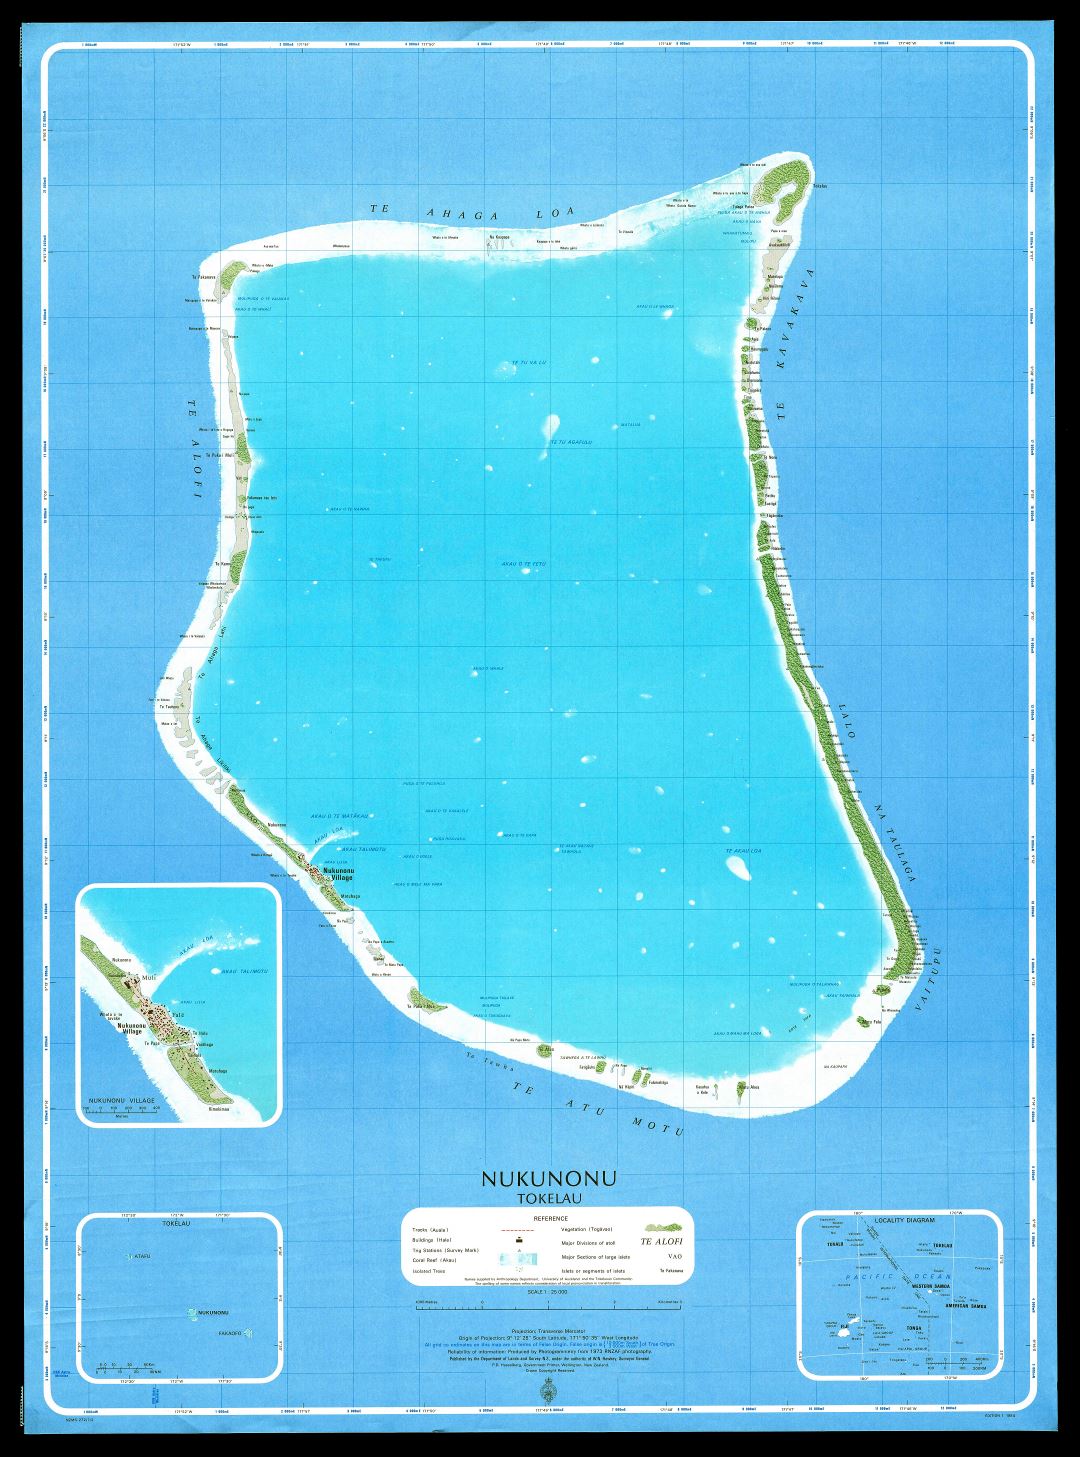 Large scale topographical map of Nukunonu Atoll, Tokelau